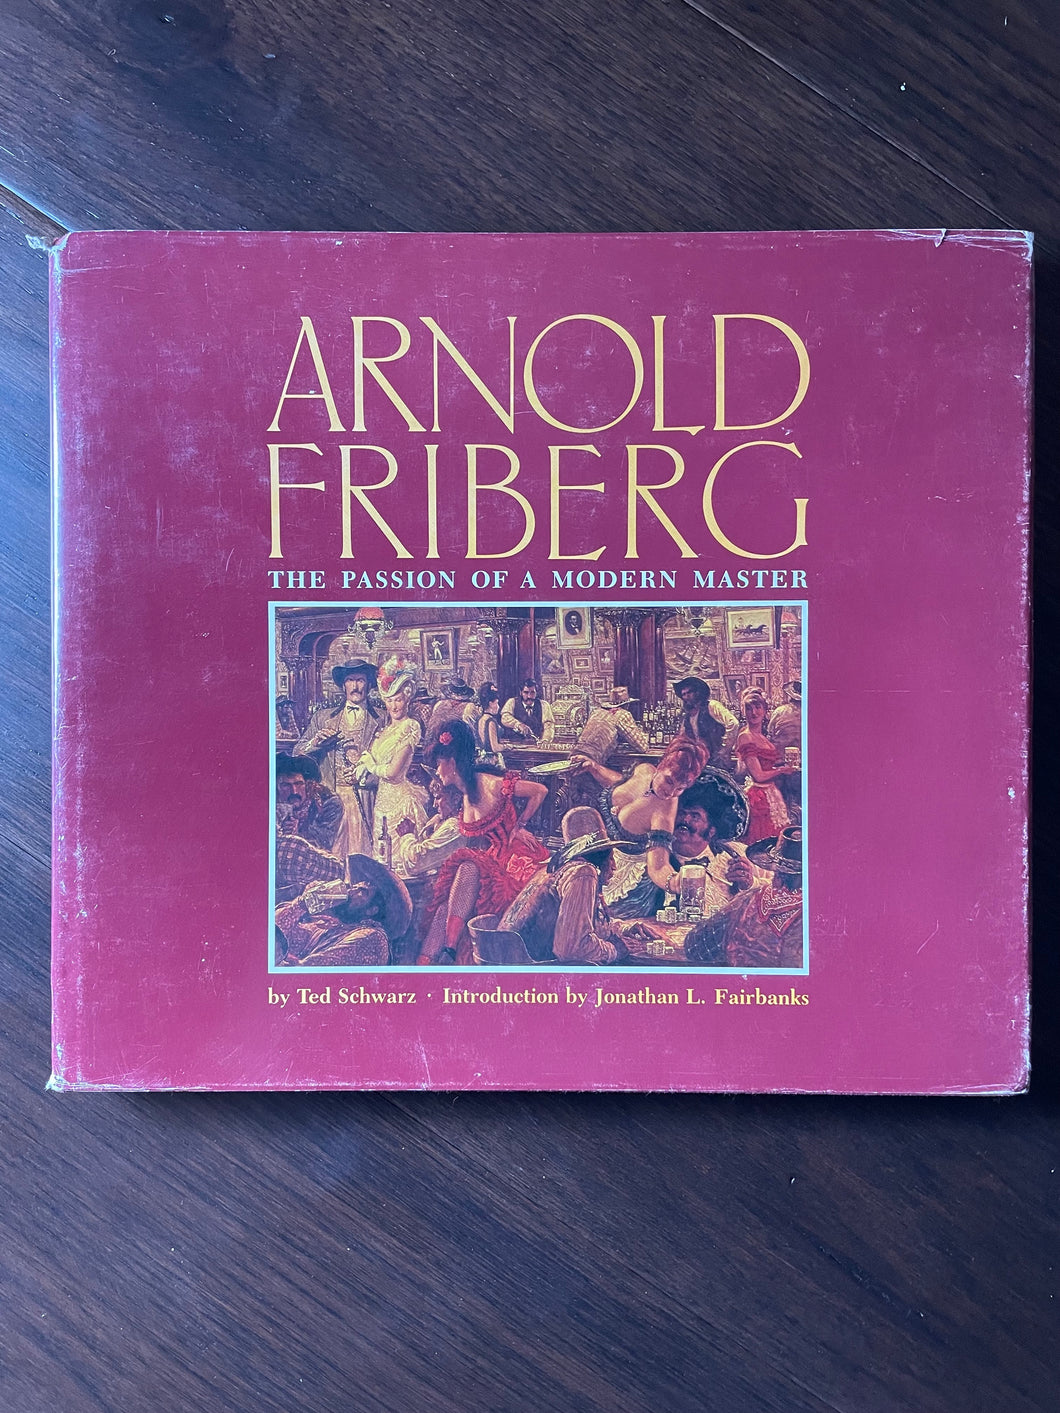 Arnold Friberg: The Passion of a Modern Master